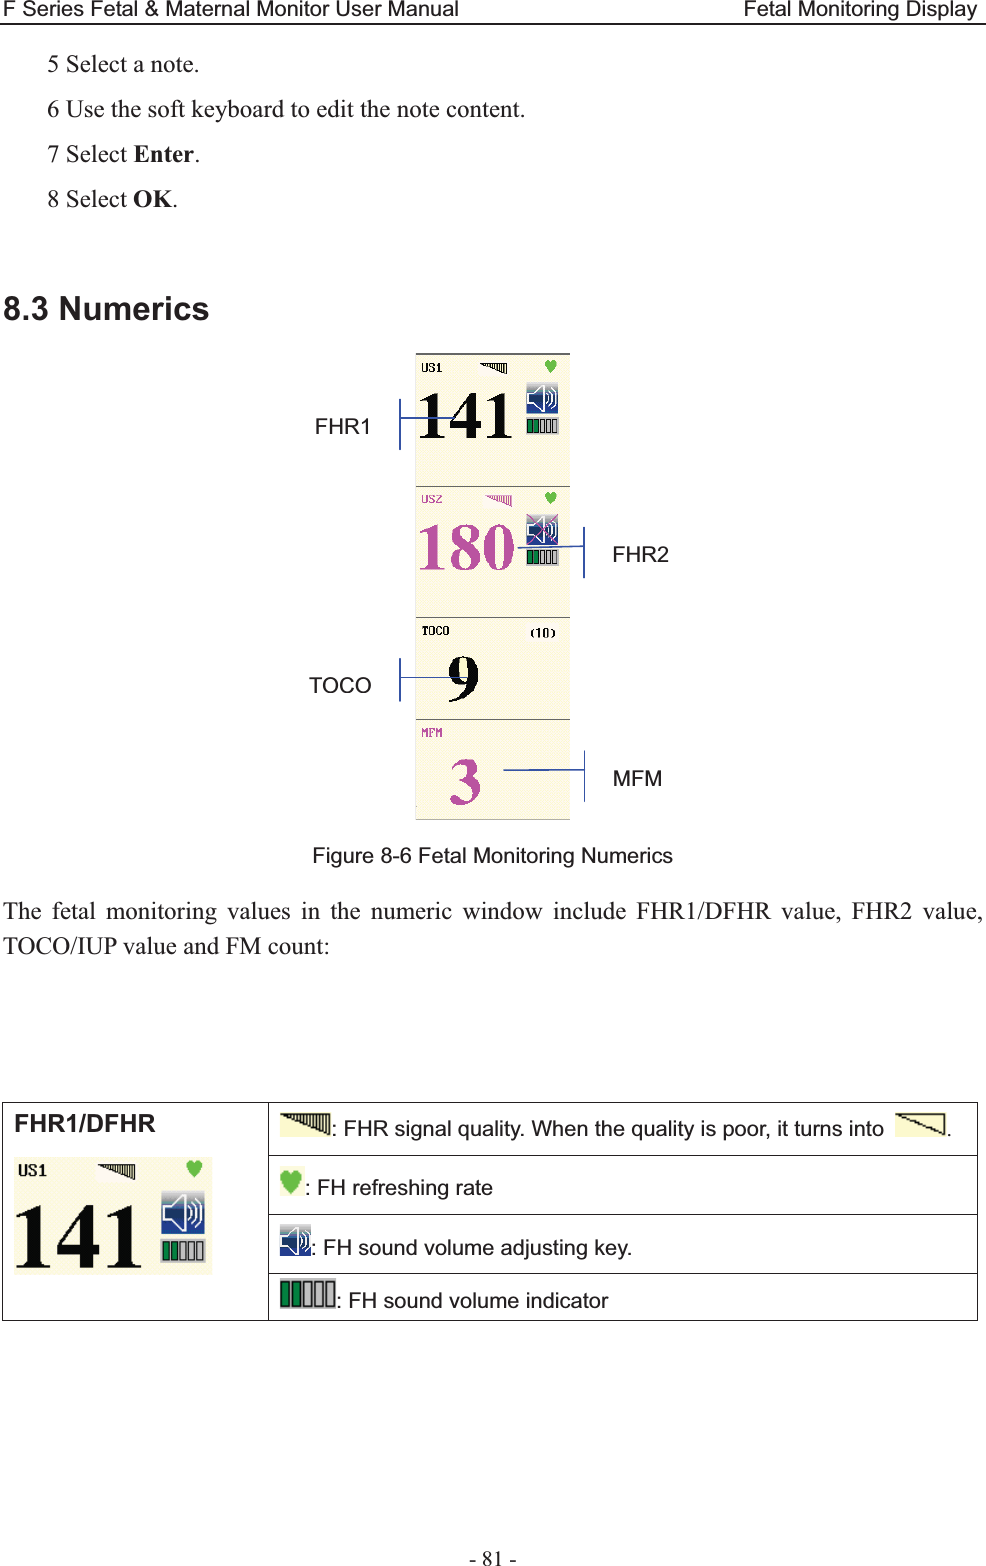 F Series Fetal &amp; Maternal Monitor User Manual                          Fetal Monitoring Display - 81 - 5 Select a note. 6 Use the soft keyboard to edit the note content. 7 Select Enter. 8 Select OK.  8.3 Numerics  Figure 8-6 Fetal Monitoring Numerics The fetal monitoring values in the numeric window include FHR1/DFHR value, FHR2 value, TOCO/IUP value and FM count:   FHR1/DFHR   : FHR signal quality. When the quality is poor, it turns into  . : FH refreshing rate : FH sound volume adjusting key. : FH sound volume indicator FHR1 FHR2 TOCOMFM 